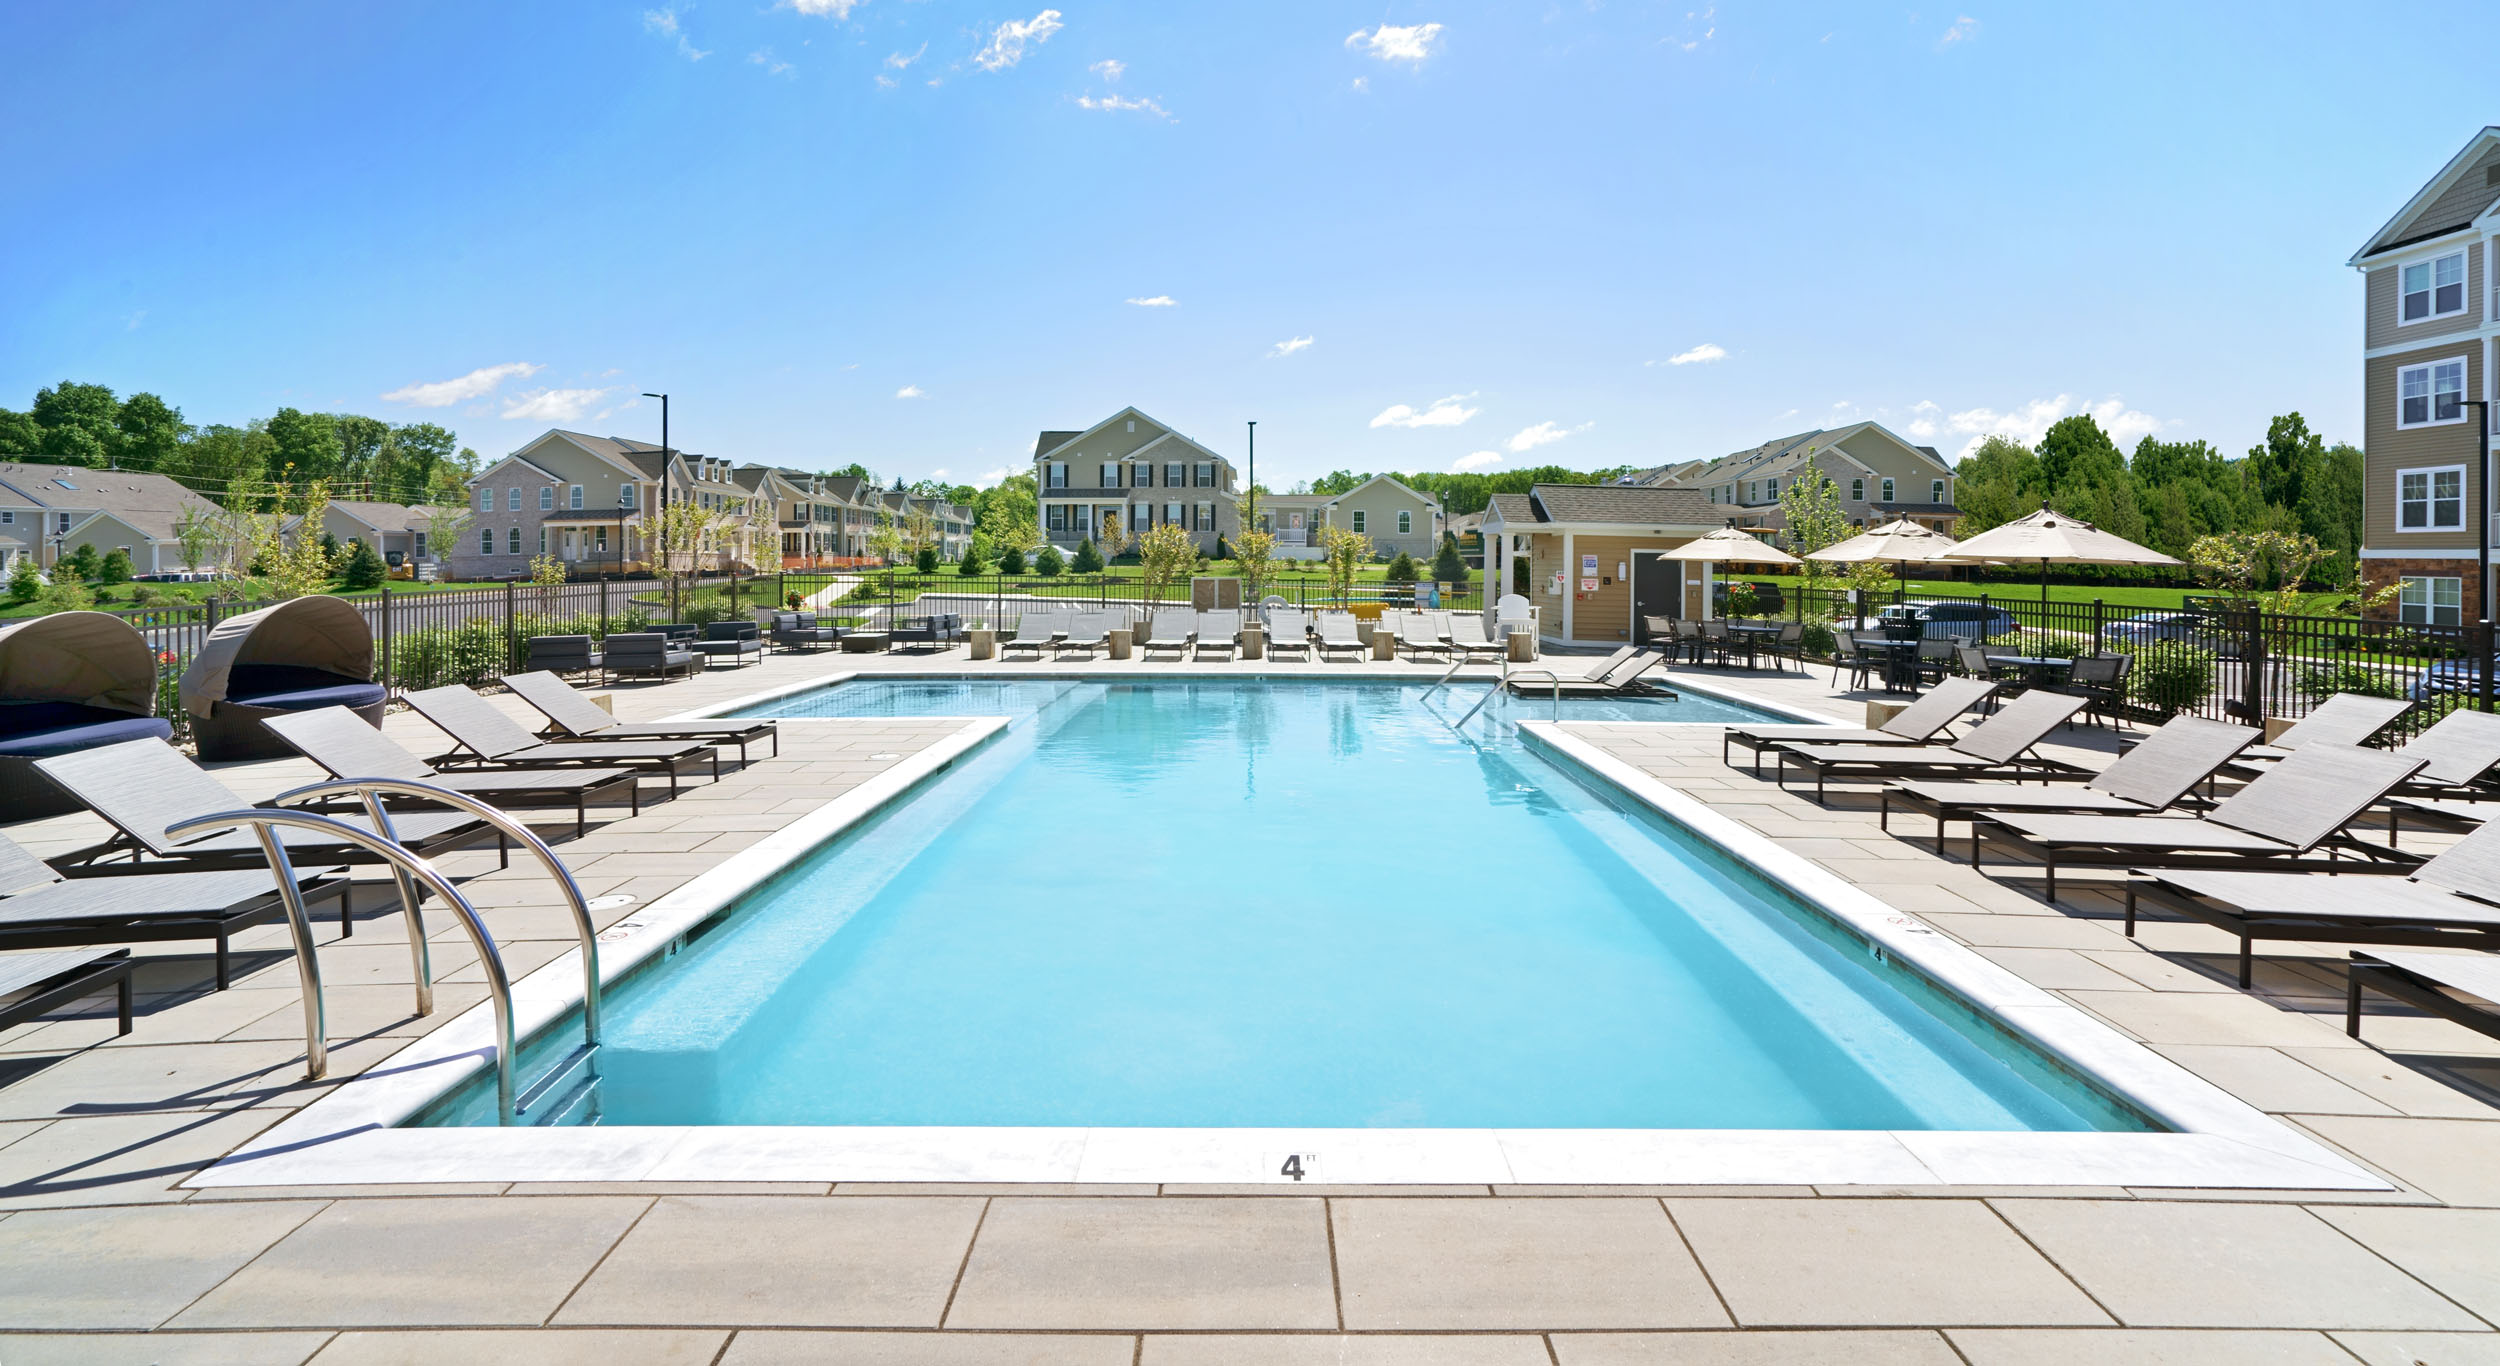 Pool and outdoor lounge area at Parc at Princeton Junction